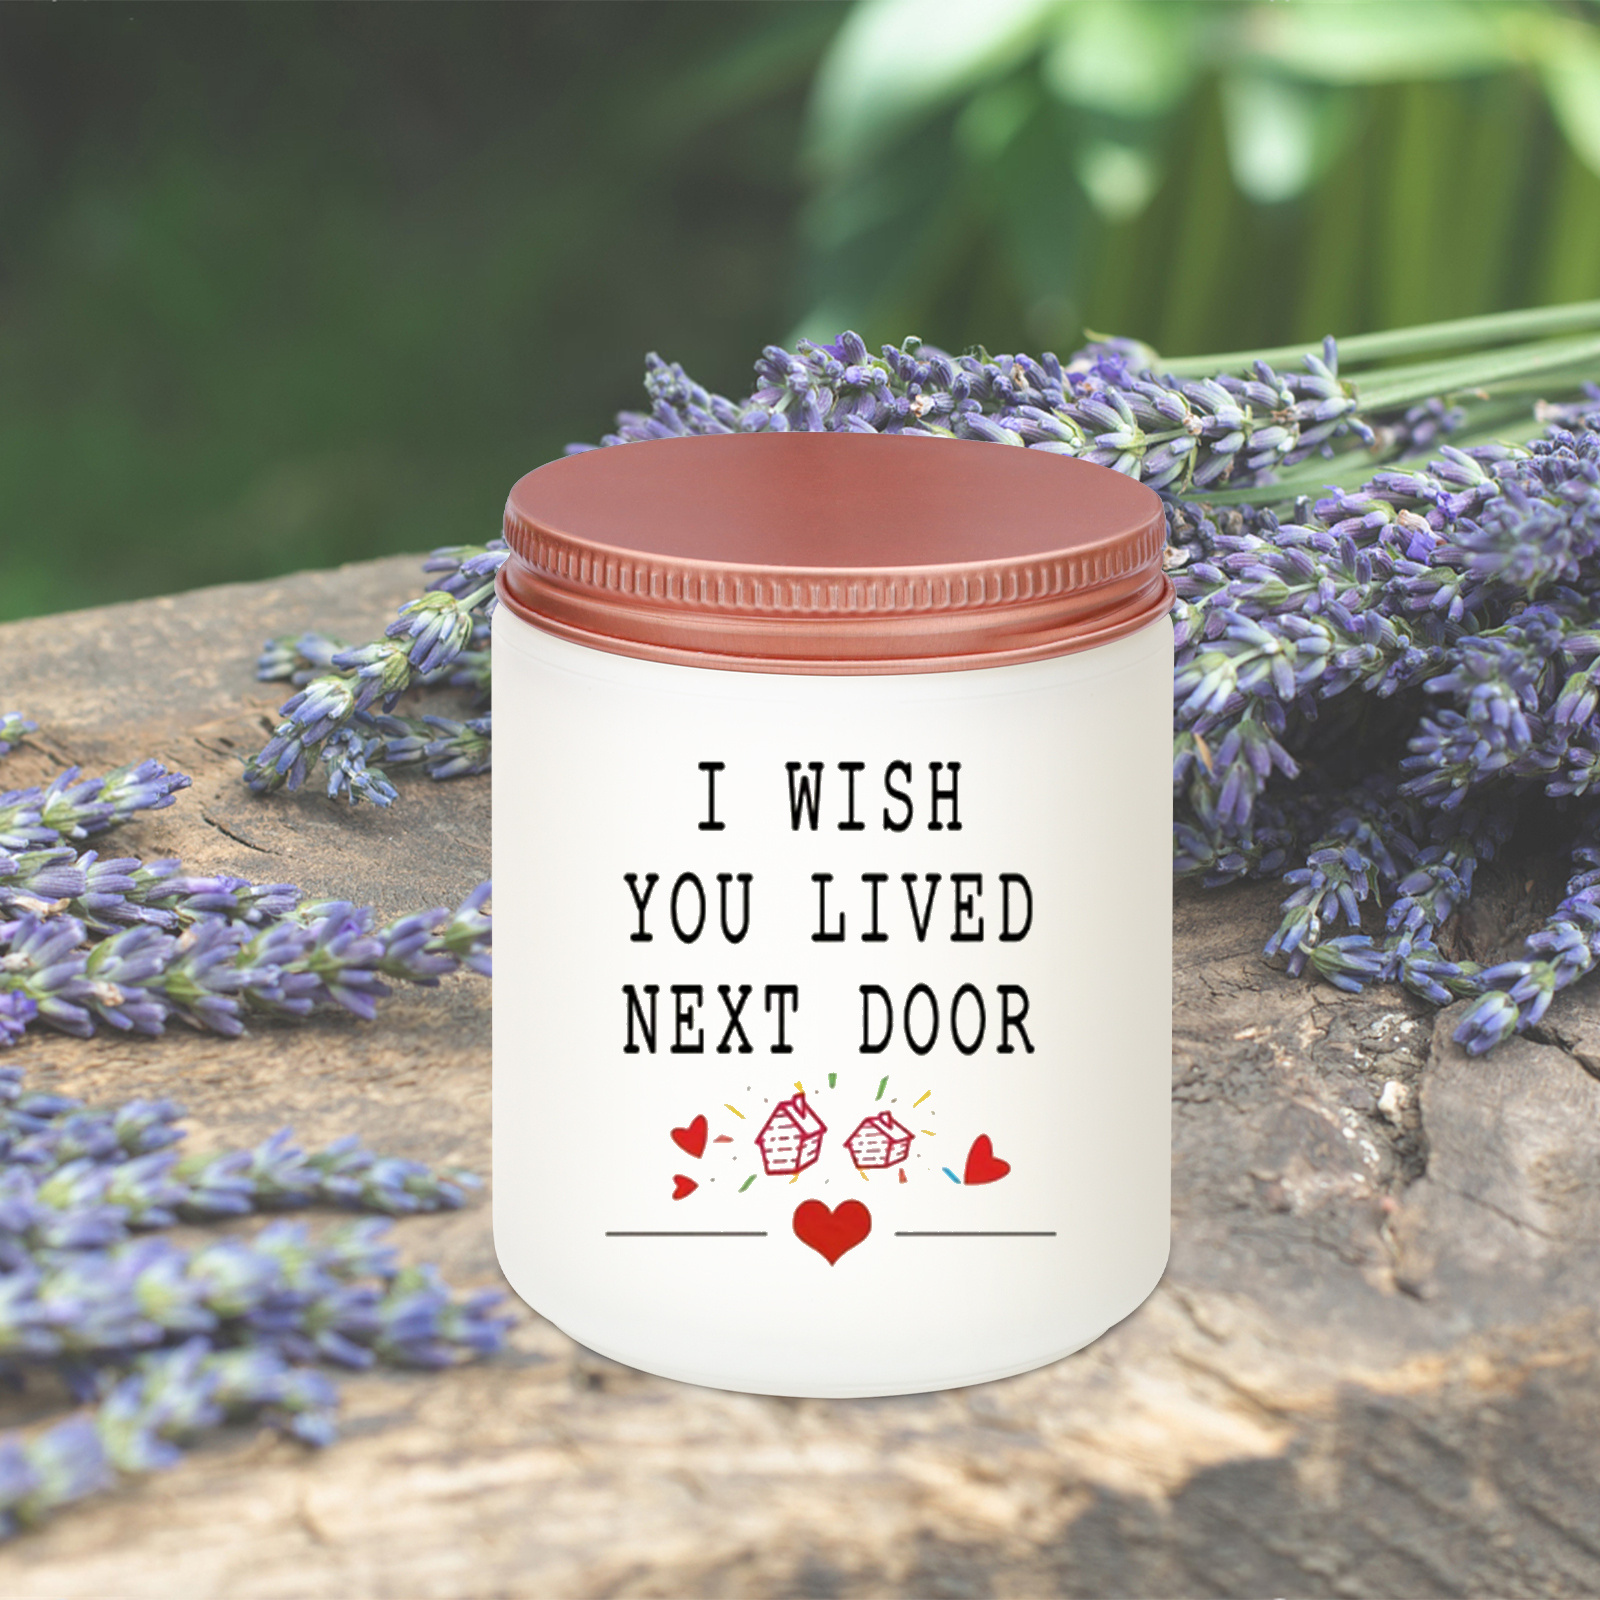 

Birthday Gifts For Women, Best Friend Birthday Gifts Ideas Candles Gifts For Women Friend Sister Neighbor Girlfriend - I Wish You Lived Next Door- Funny Strong Scented Candles Gifts For Home